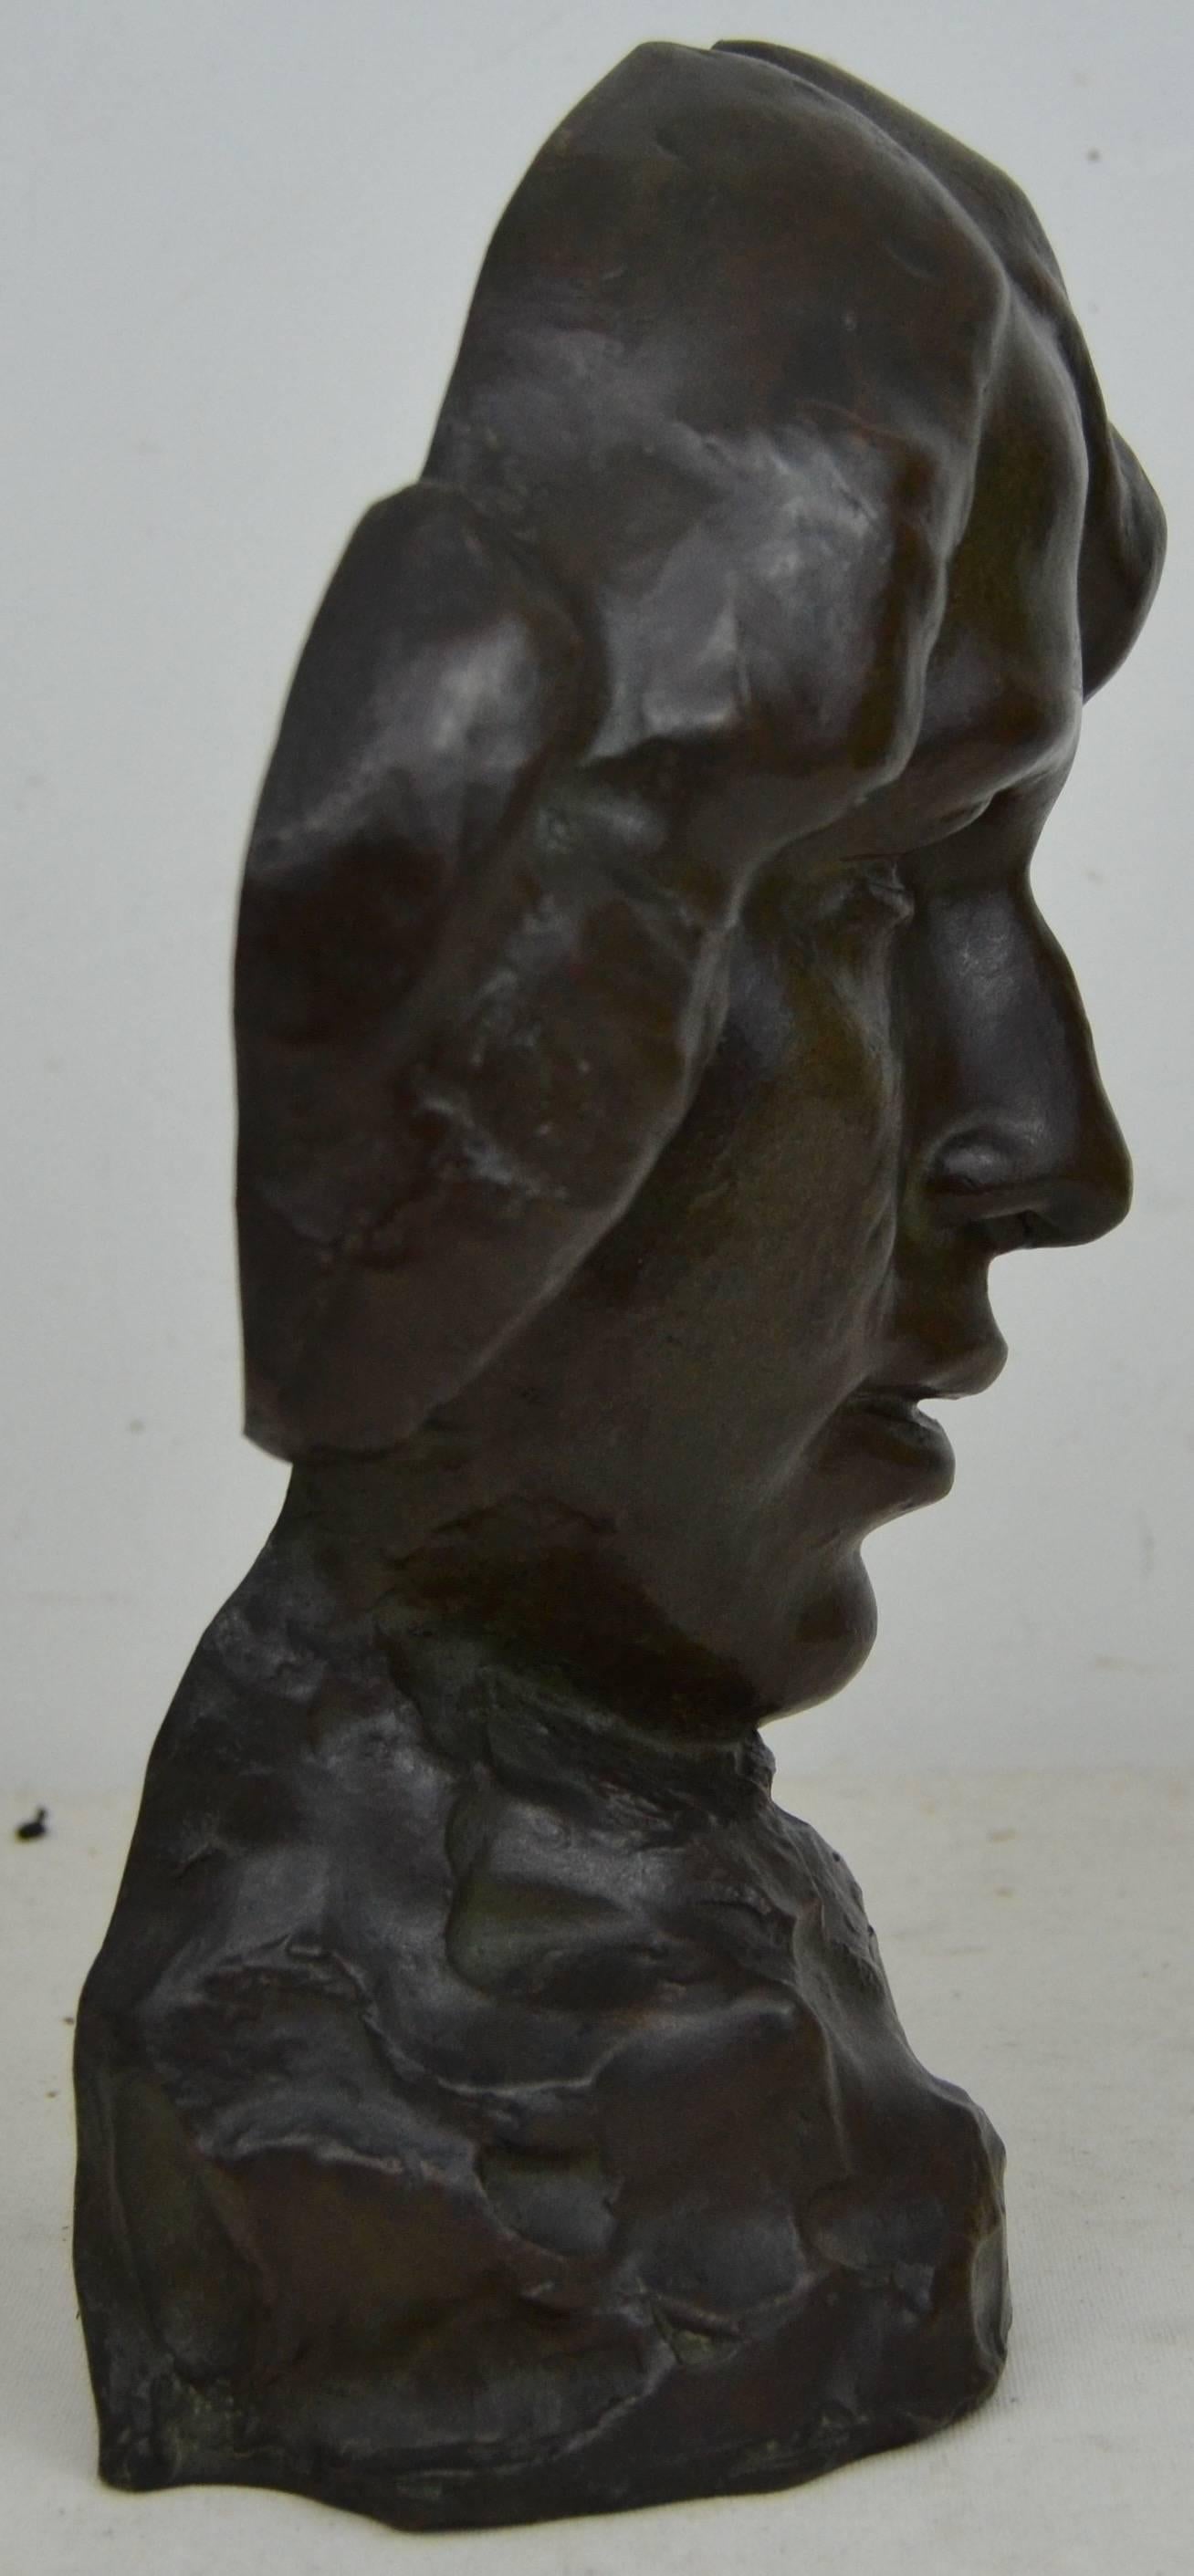 Bronze 3/4 relief bust of a women, dark brown patina with green highlights. Inscribed signature E. Jungblut Sahl, Weimar period.